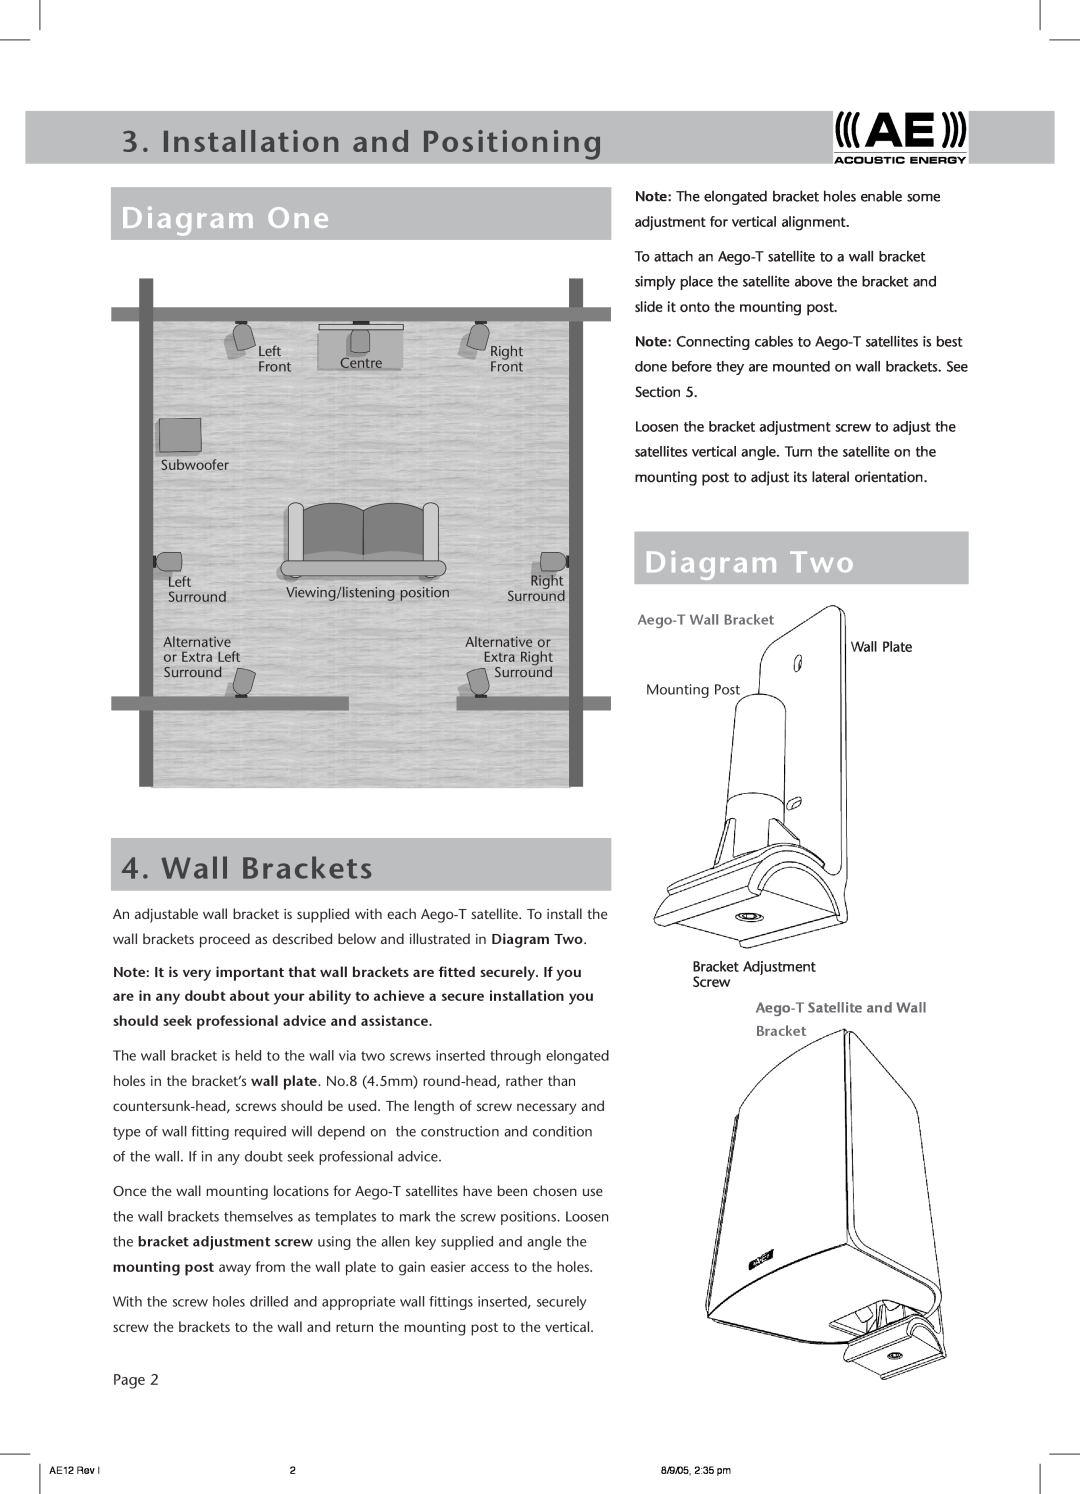 Acoustic Energy Installation and Positioning Diagram One, Diagram Two, Wall Brackets, Page, Aego-TWall Bracket 